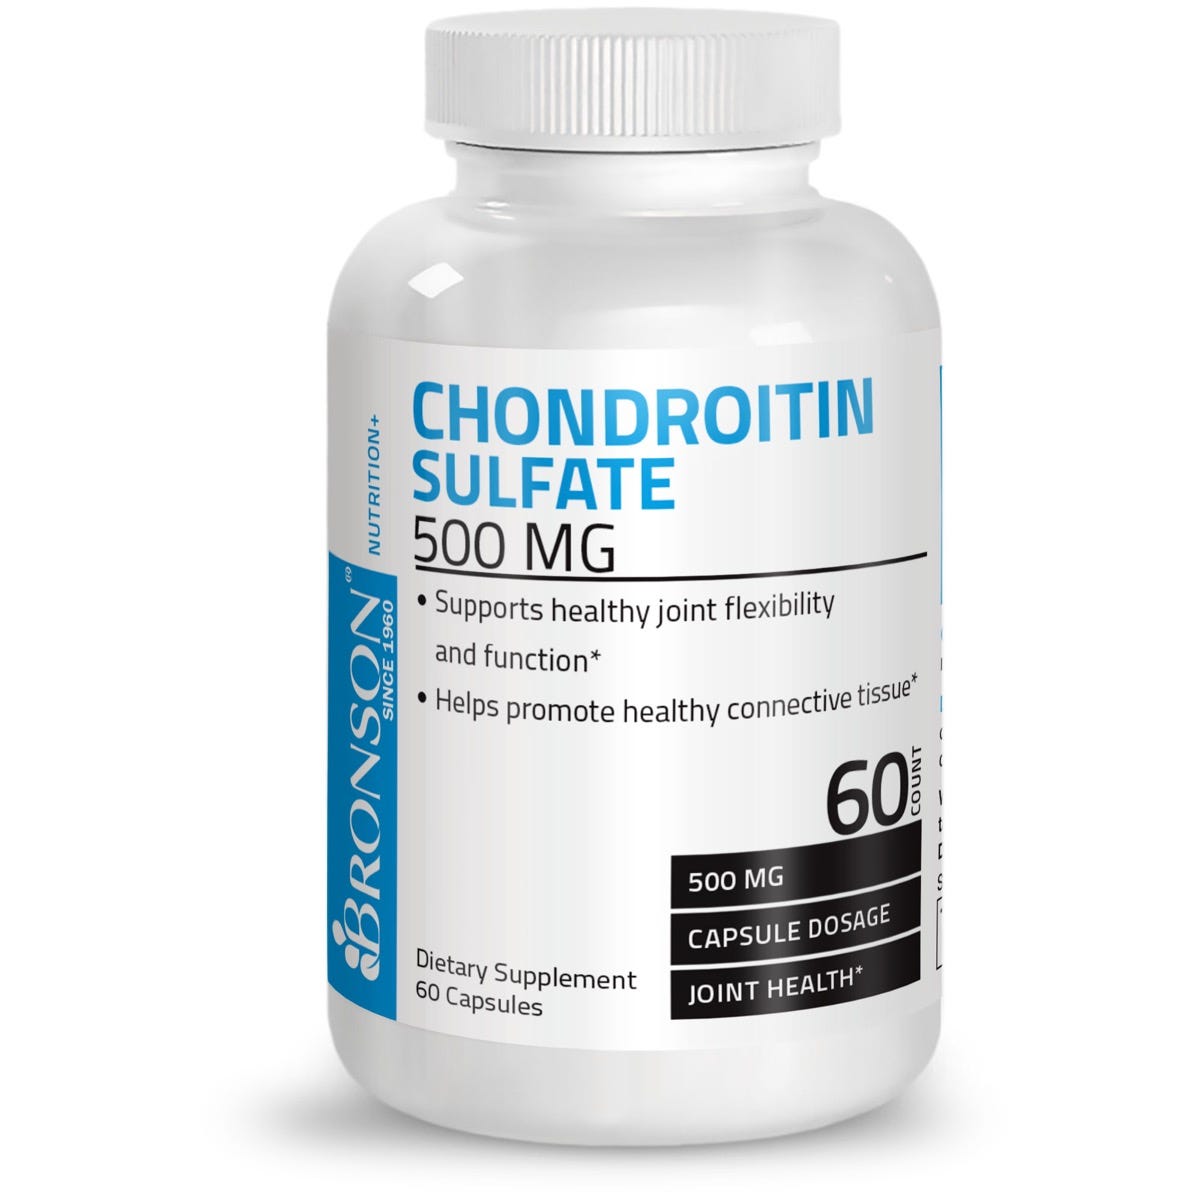 Chondroitin Sulfate - 500 mg - 60 Capsules view 2 of 5